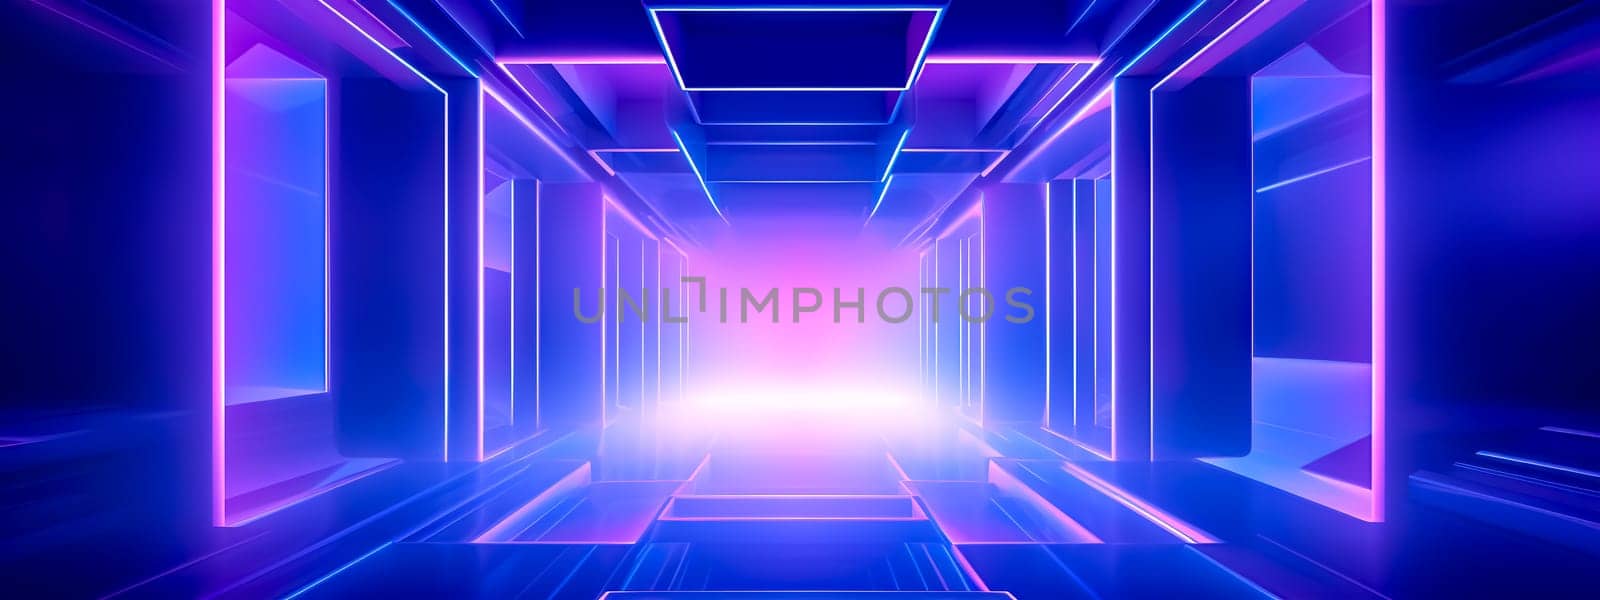 3D digital art of a virtual corridor with neon lighting, creating a sense of depth and an illusion of an alternate, cybernetic dimension, banner with copy space